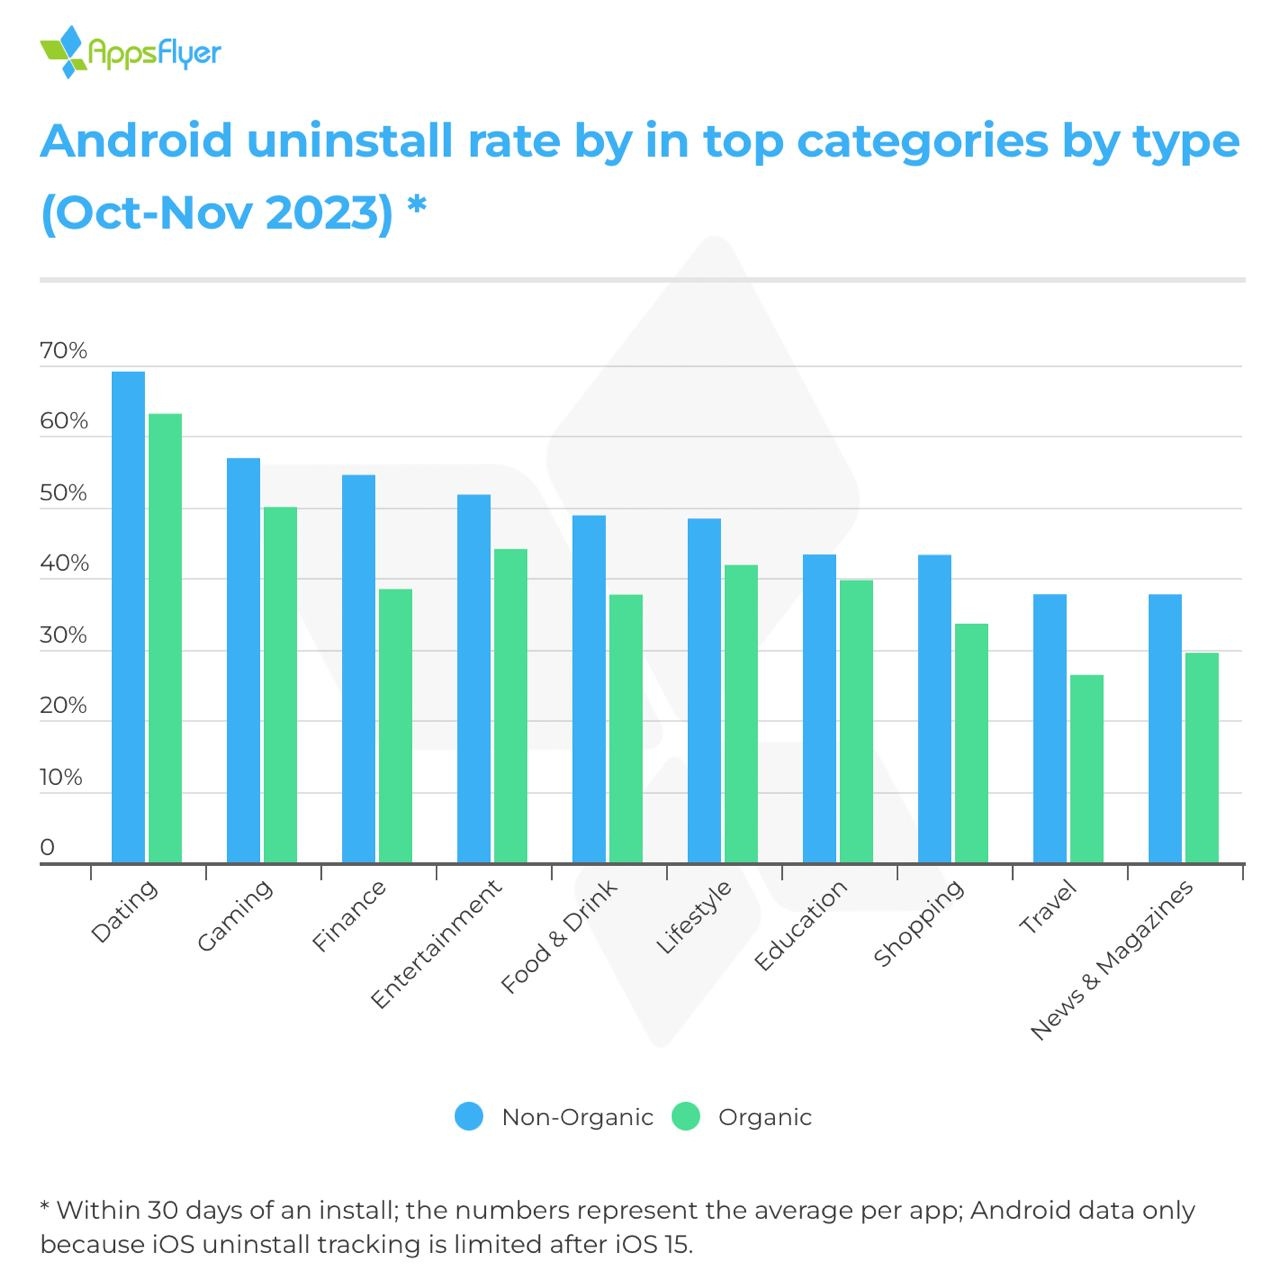 Android uninstall rate by type